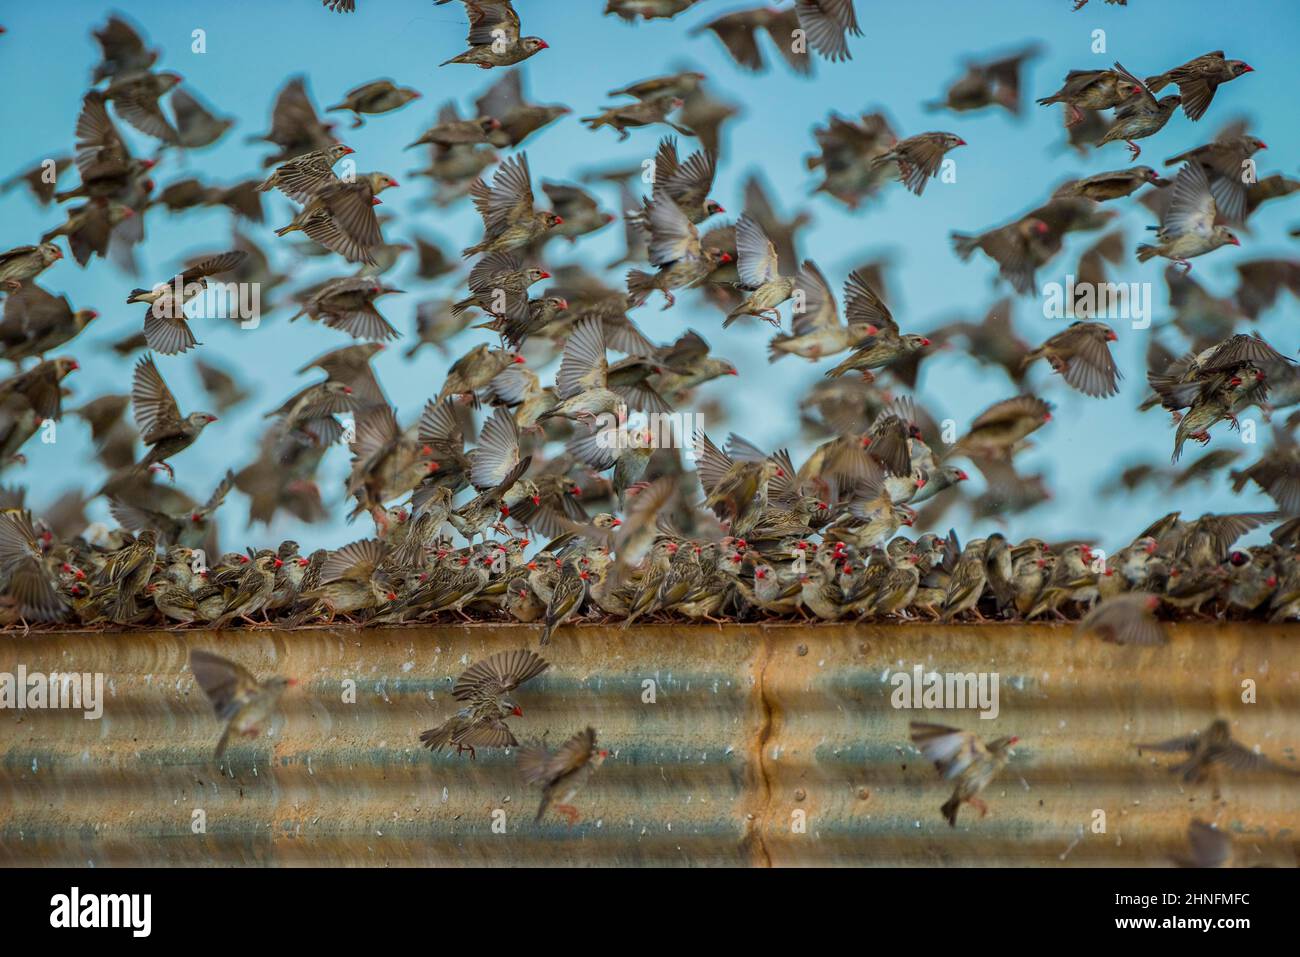 A mega flock of red-billed quelea (Quelea quelea), gather at a water tank, Etosha National Park, Namibia Stock Photo